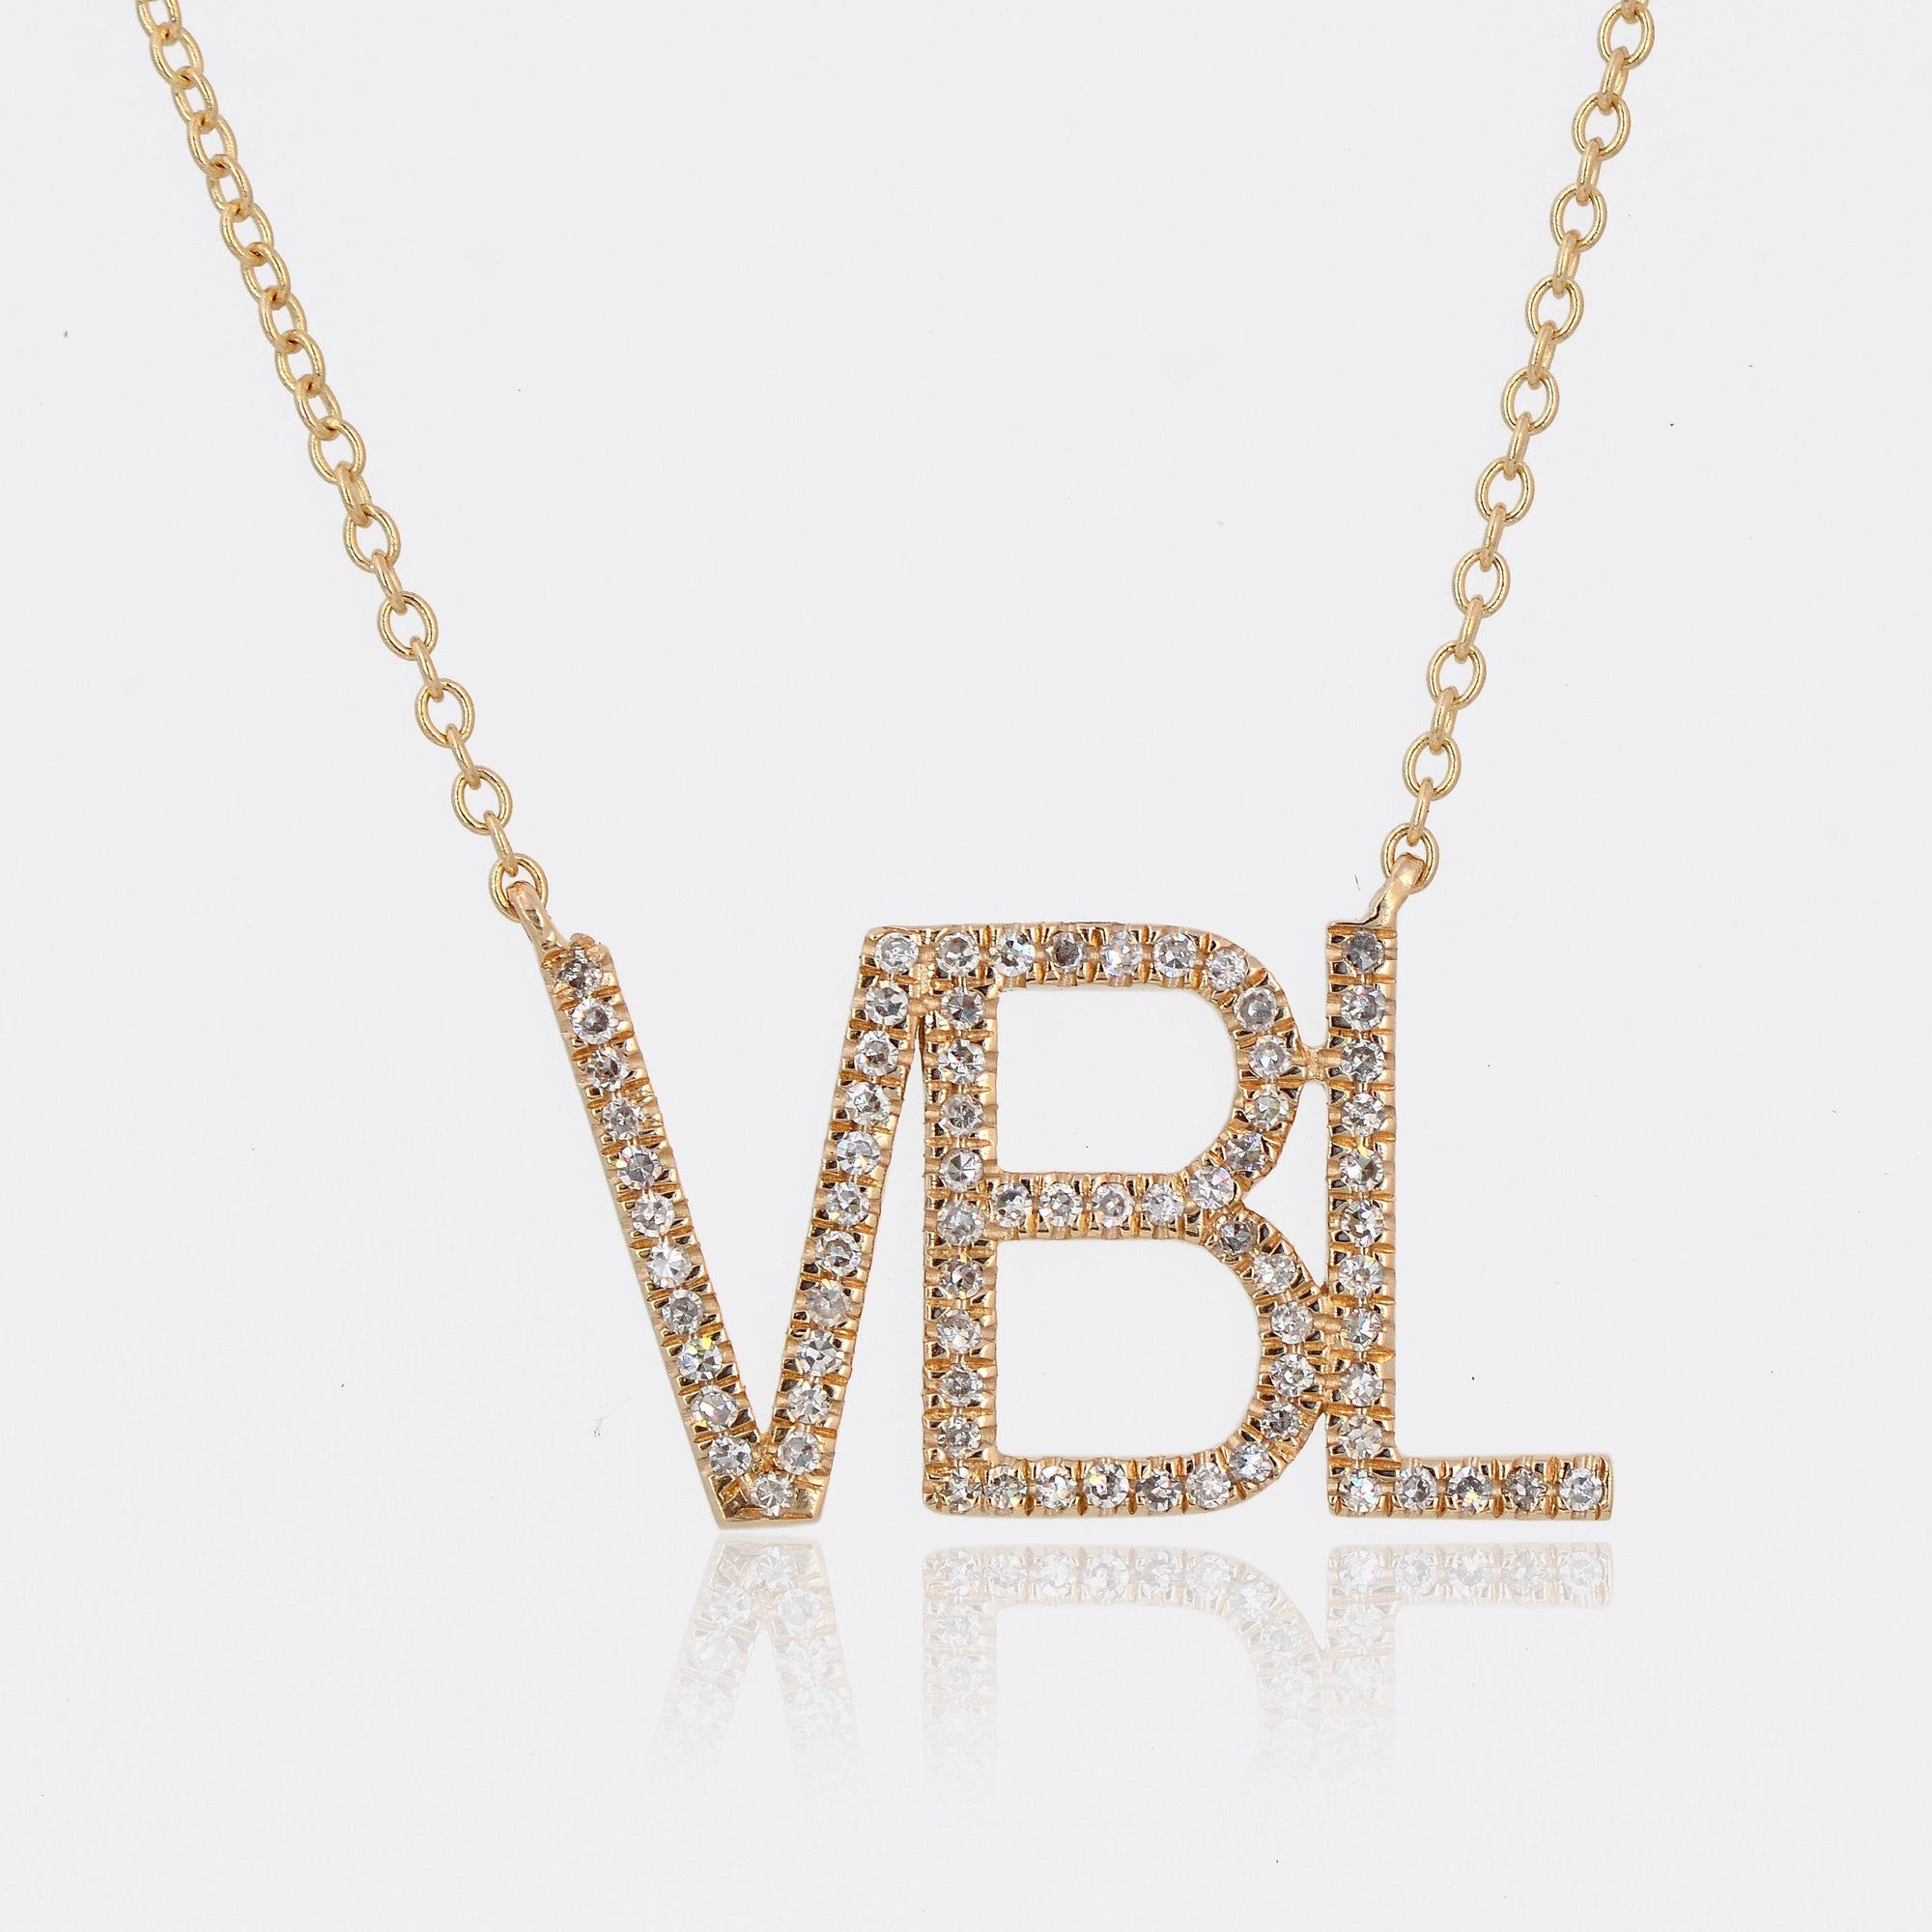 Diamond Block Letters Personalized Initial Necklace, Customized Diamond Initial Letter Chain, 14K Name Necklace, Custom Name Necklace Gift